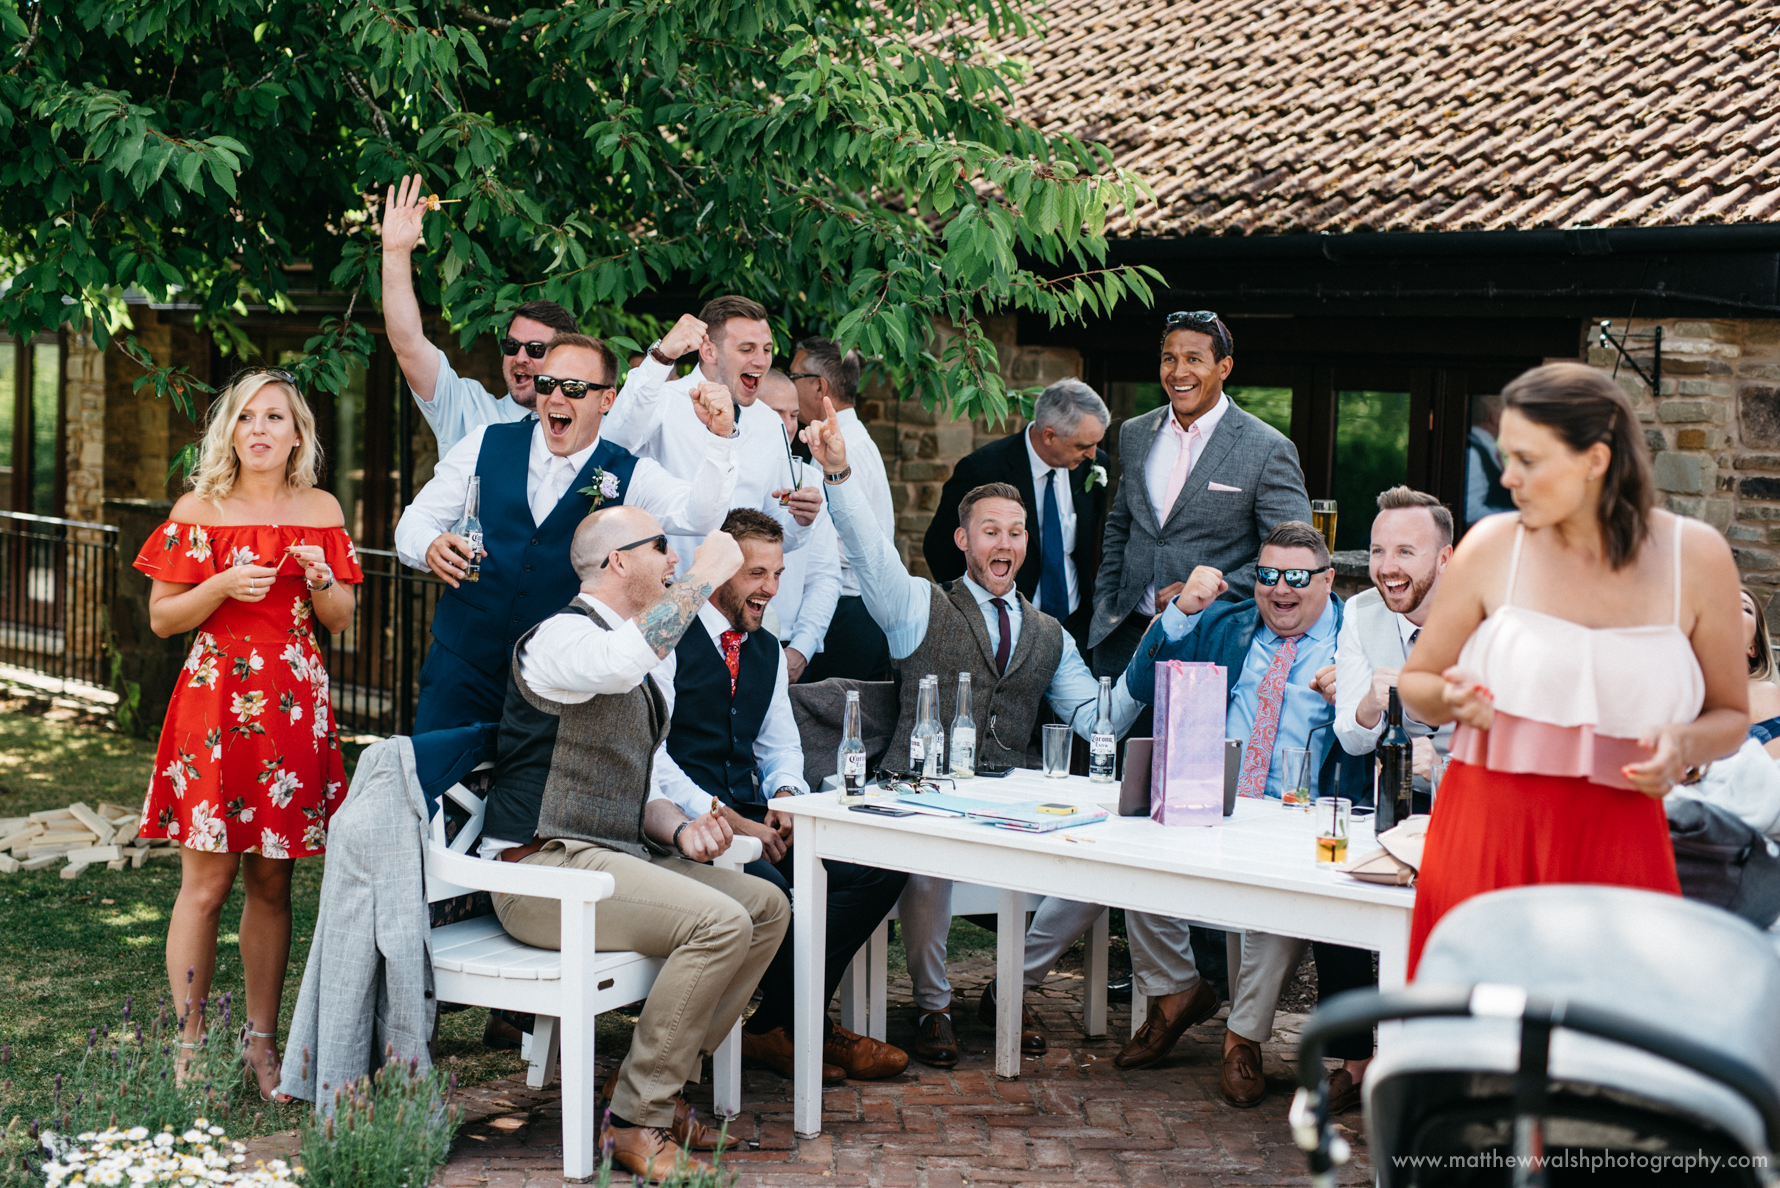 Guests celebrate as England score during a documentary style unposed photograph